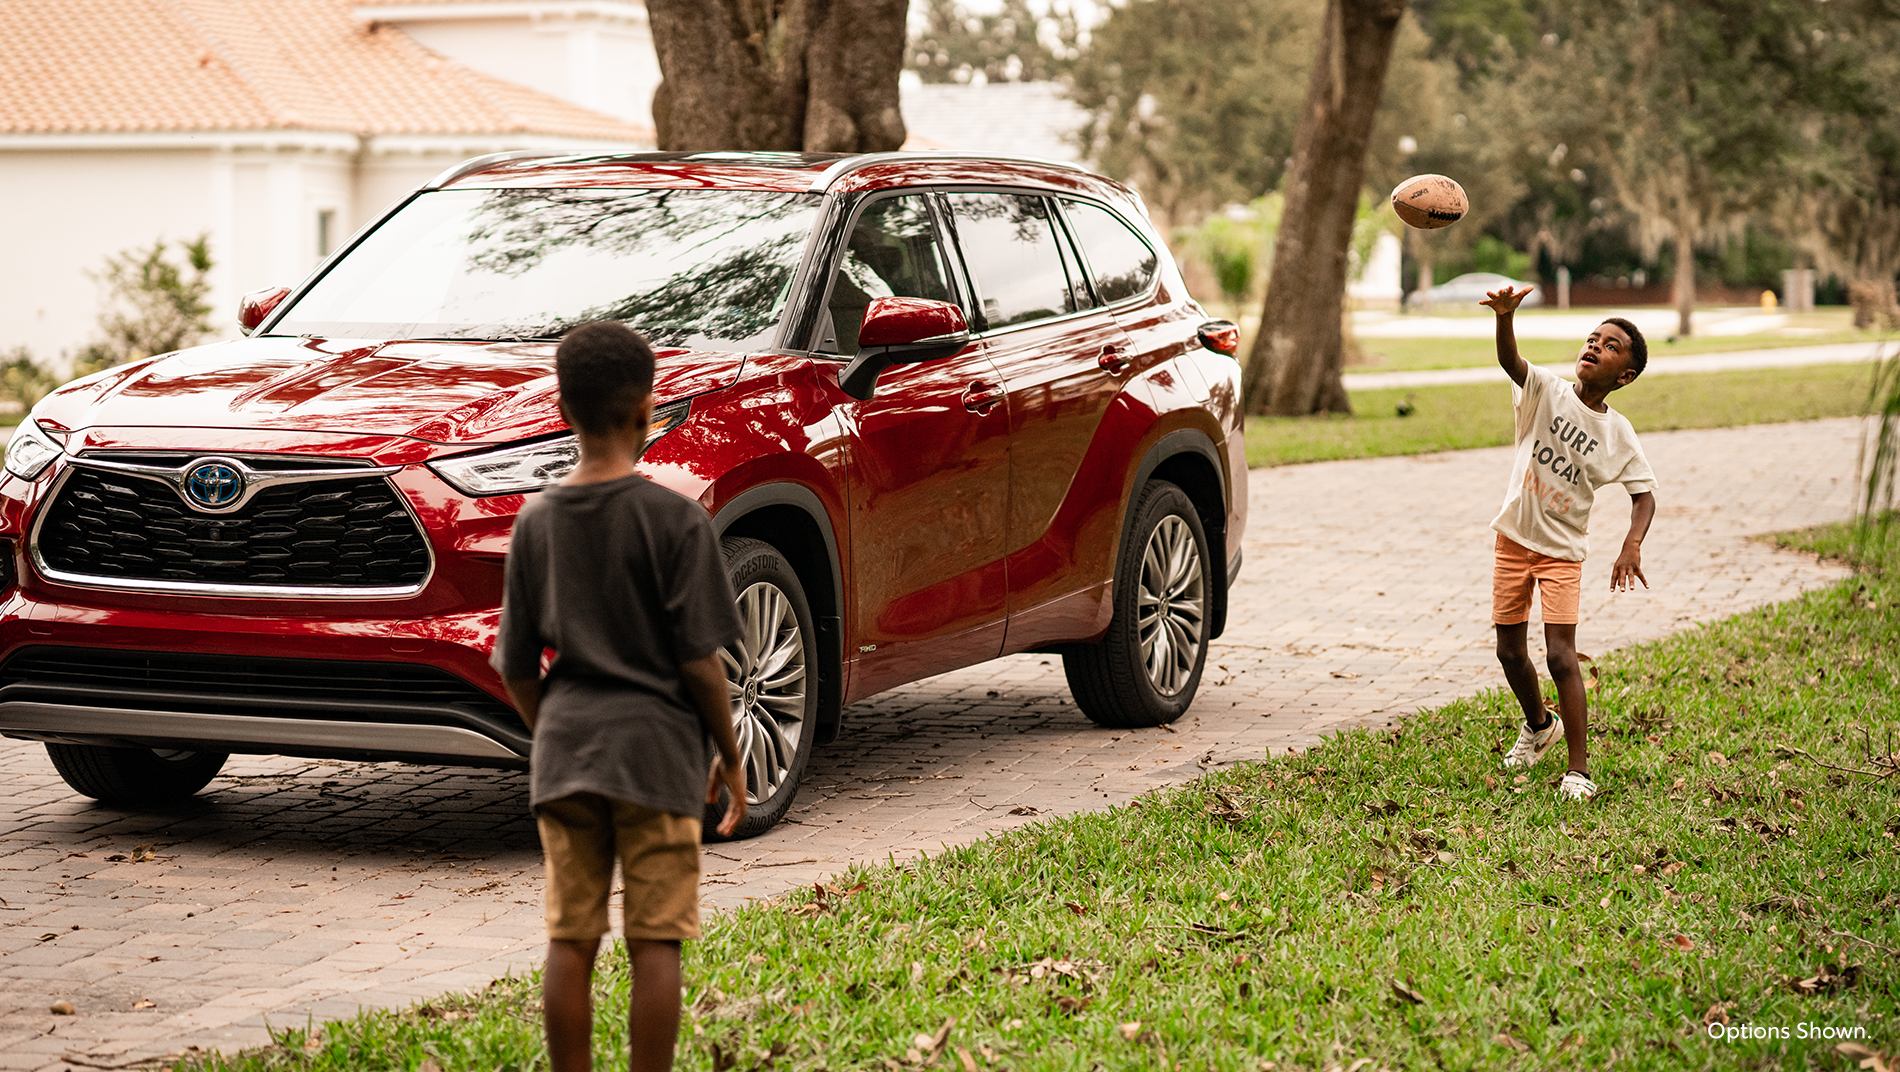 a Red Toyota Hybrid SUV is parked in a suburban driveway while 2 boys play football in the front yard